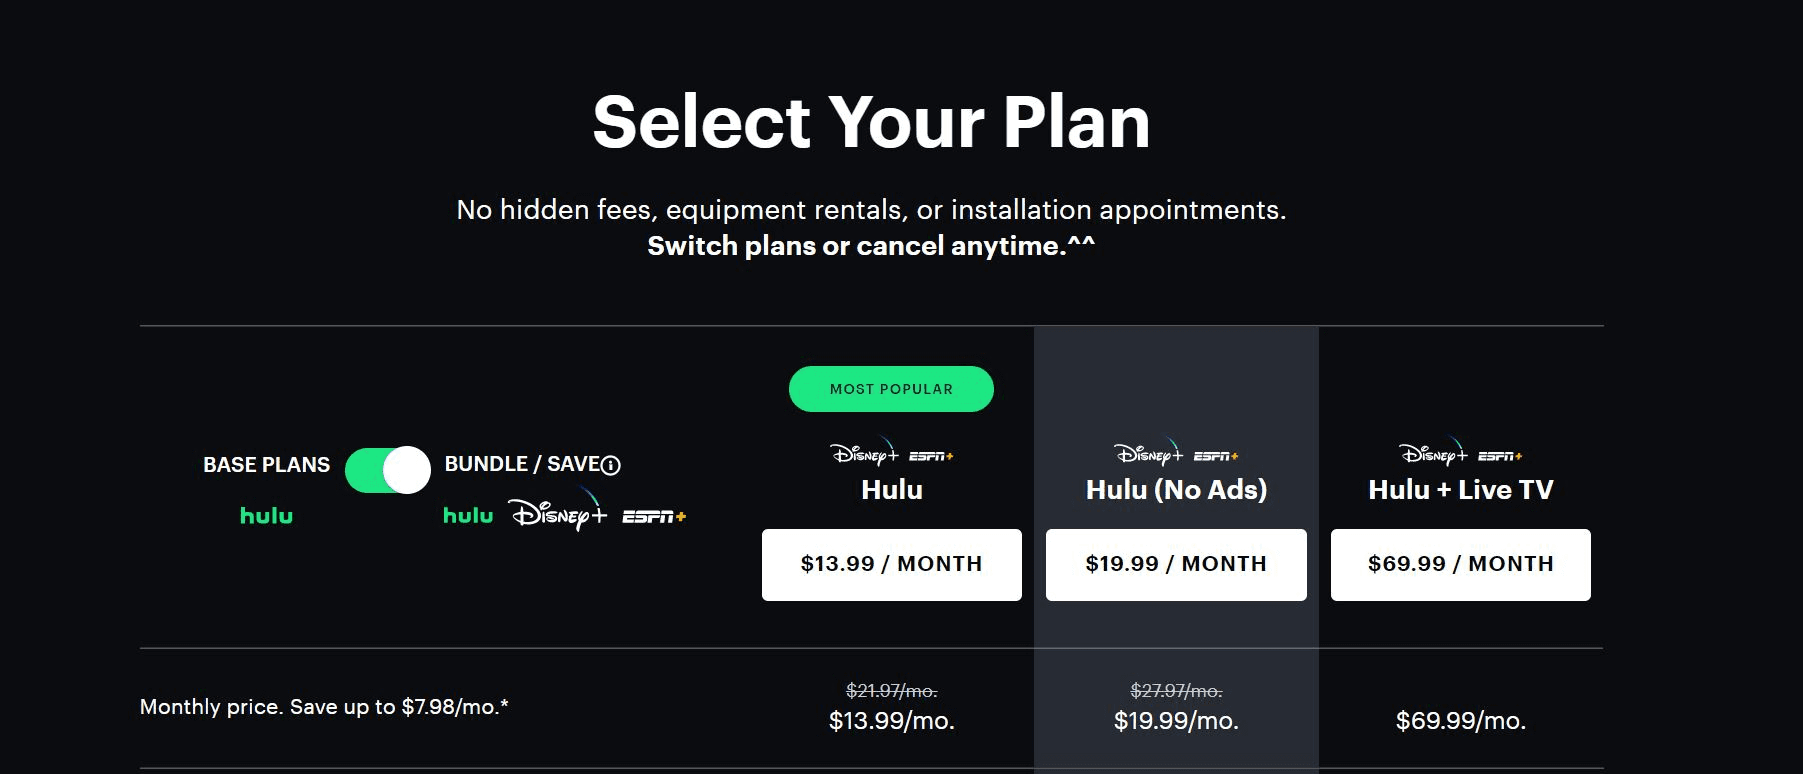 Don't cancel Hulu for the price! Share it on Together Price and save!